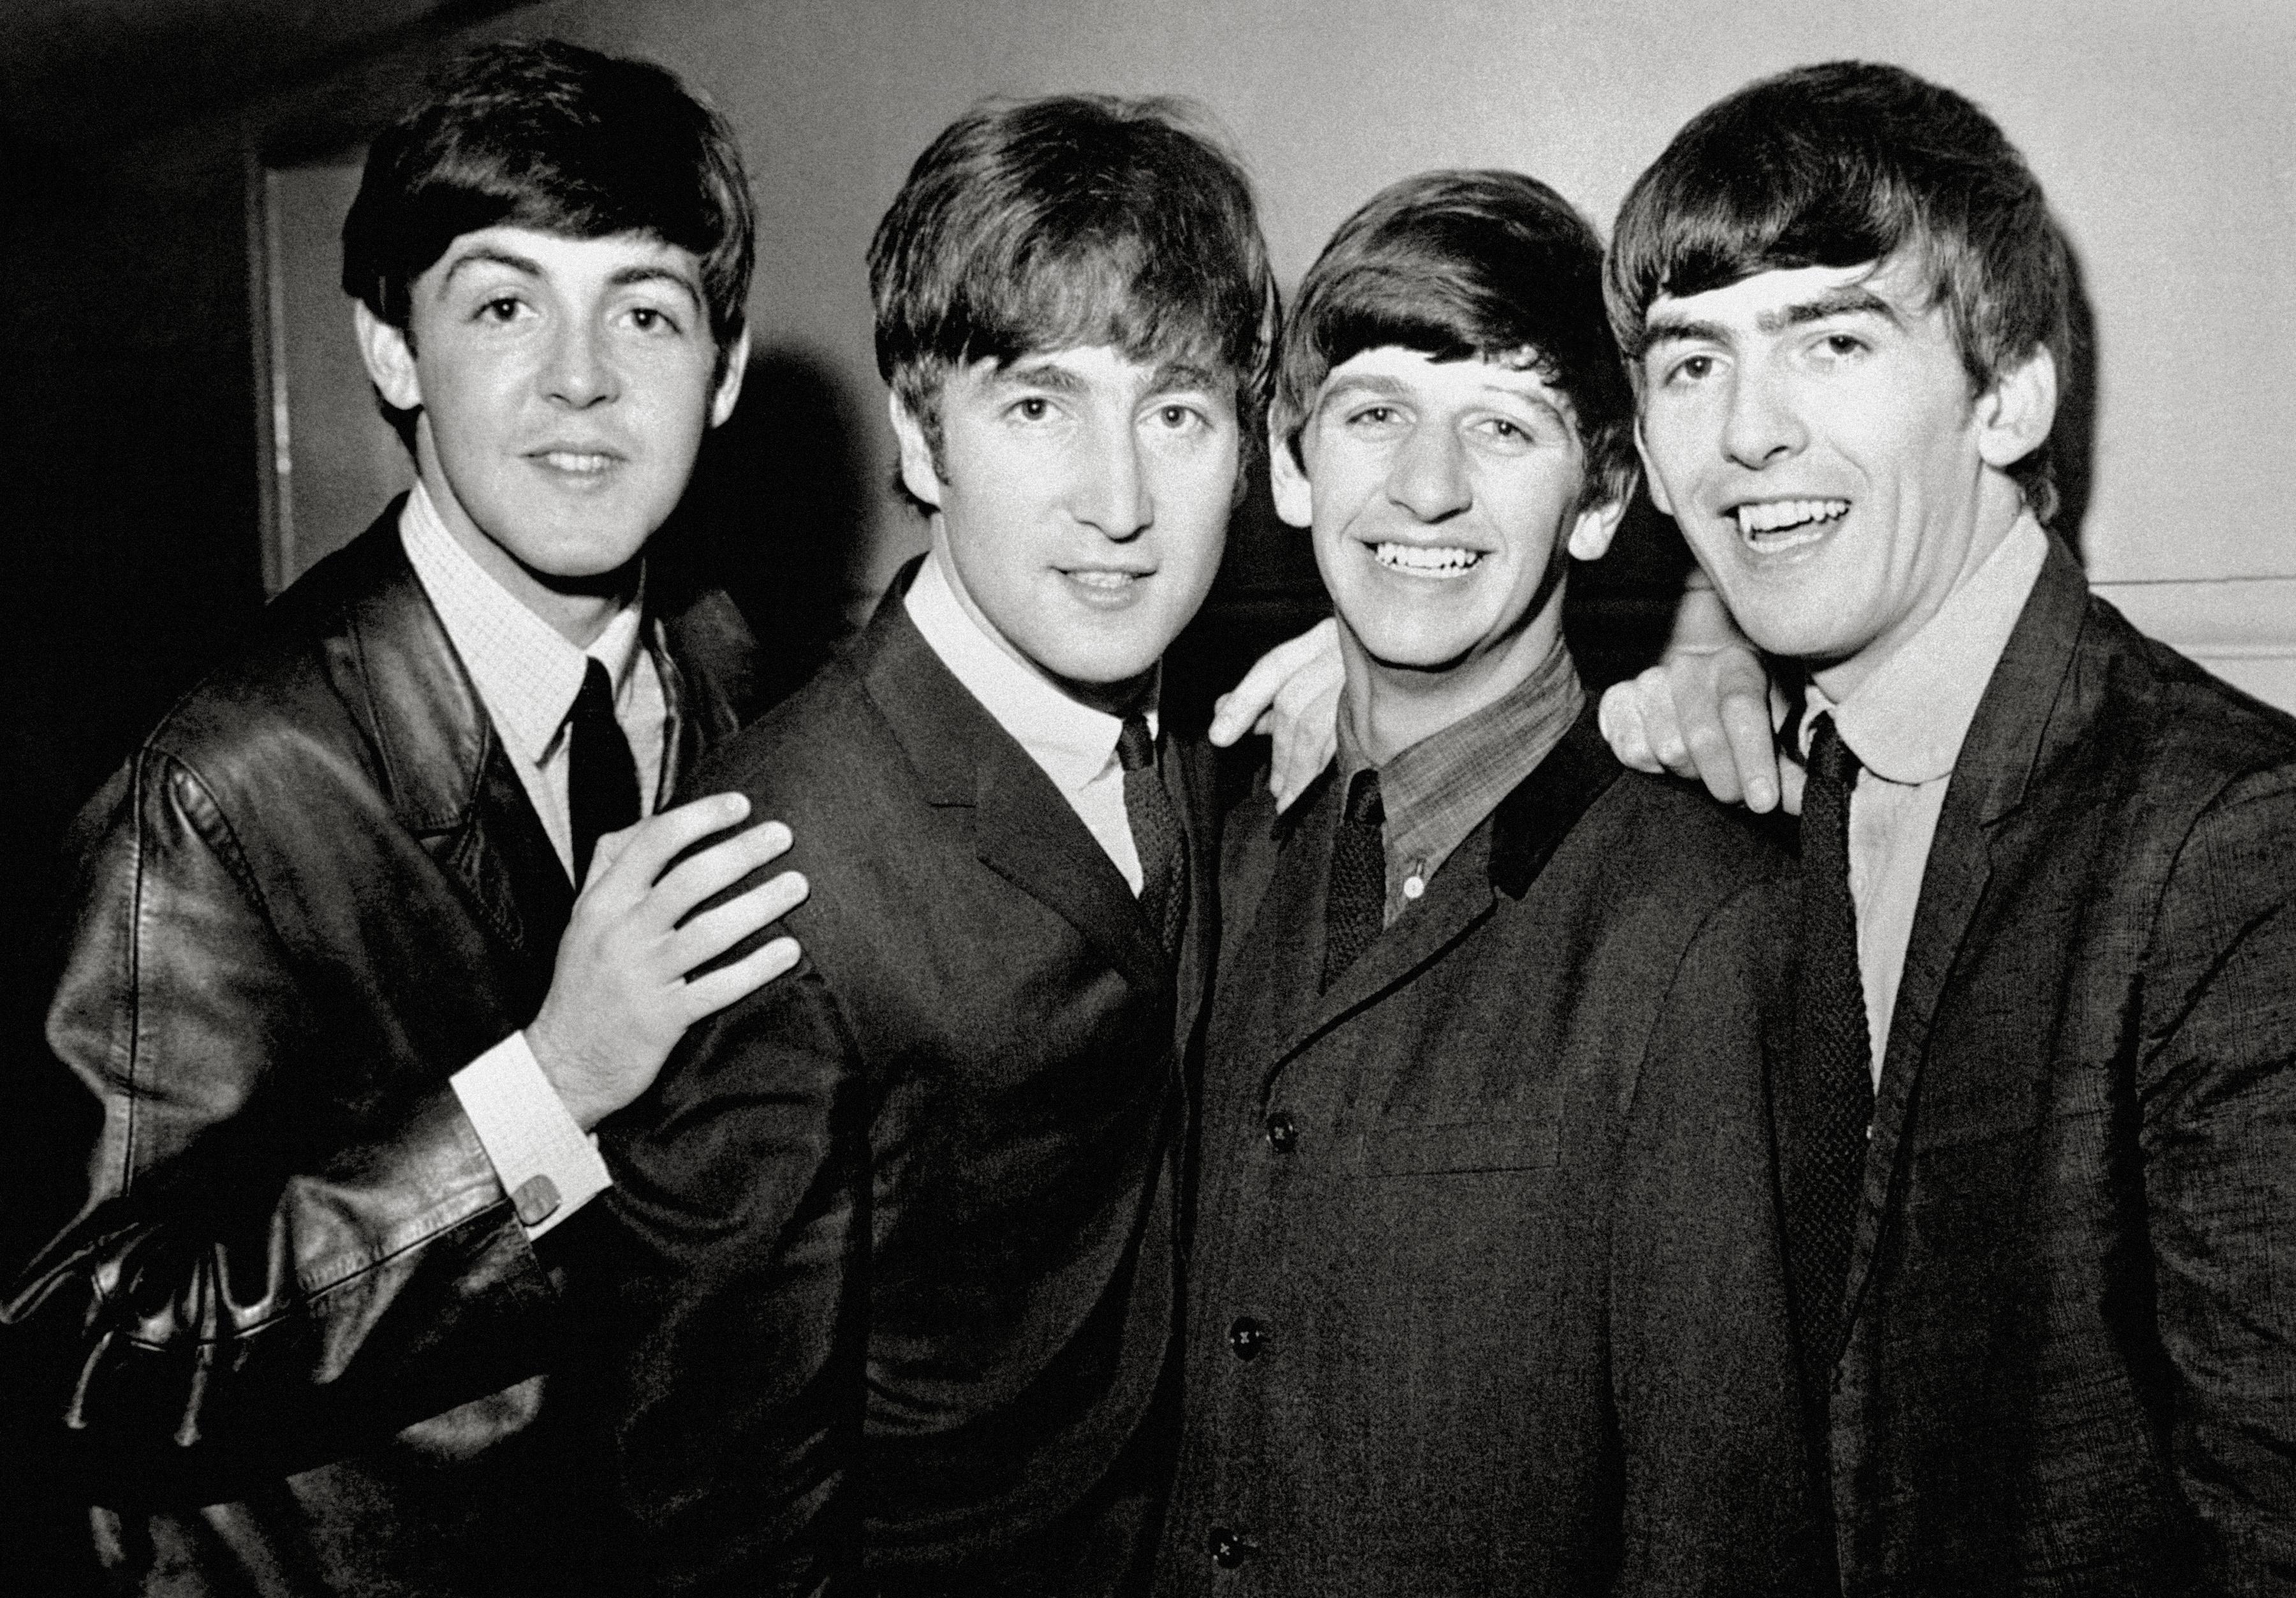 Unknown Black and White Photograph - The Beatles Posed Smiling Globe Photos Fine Art Print